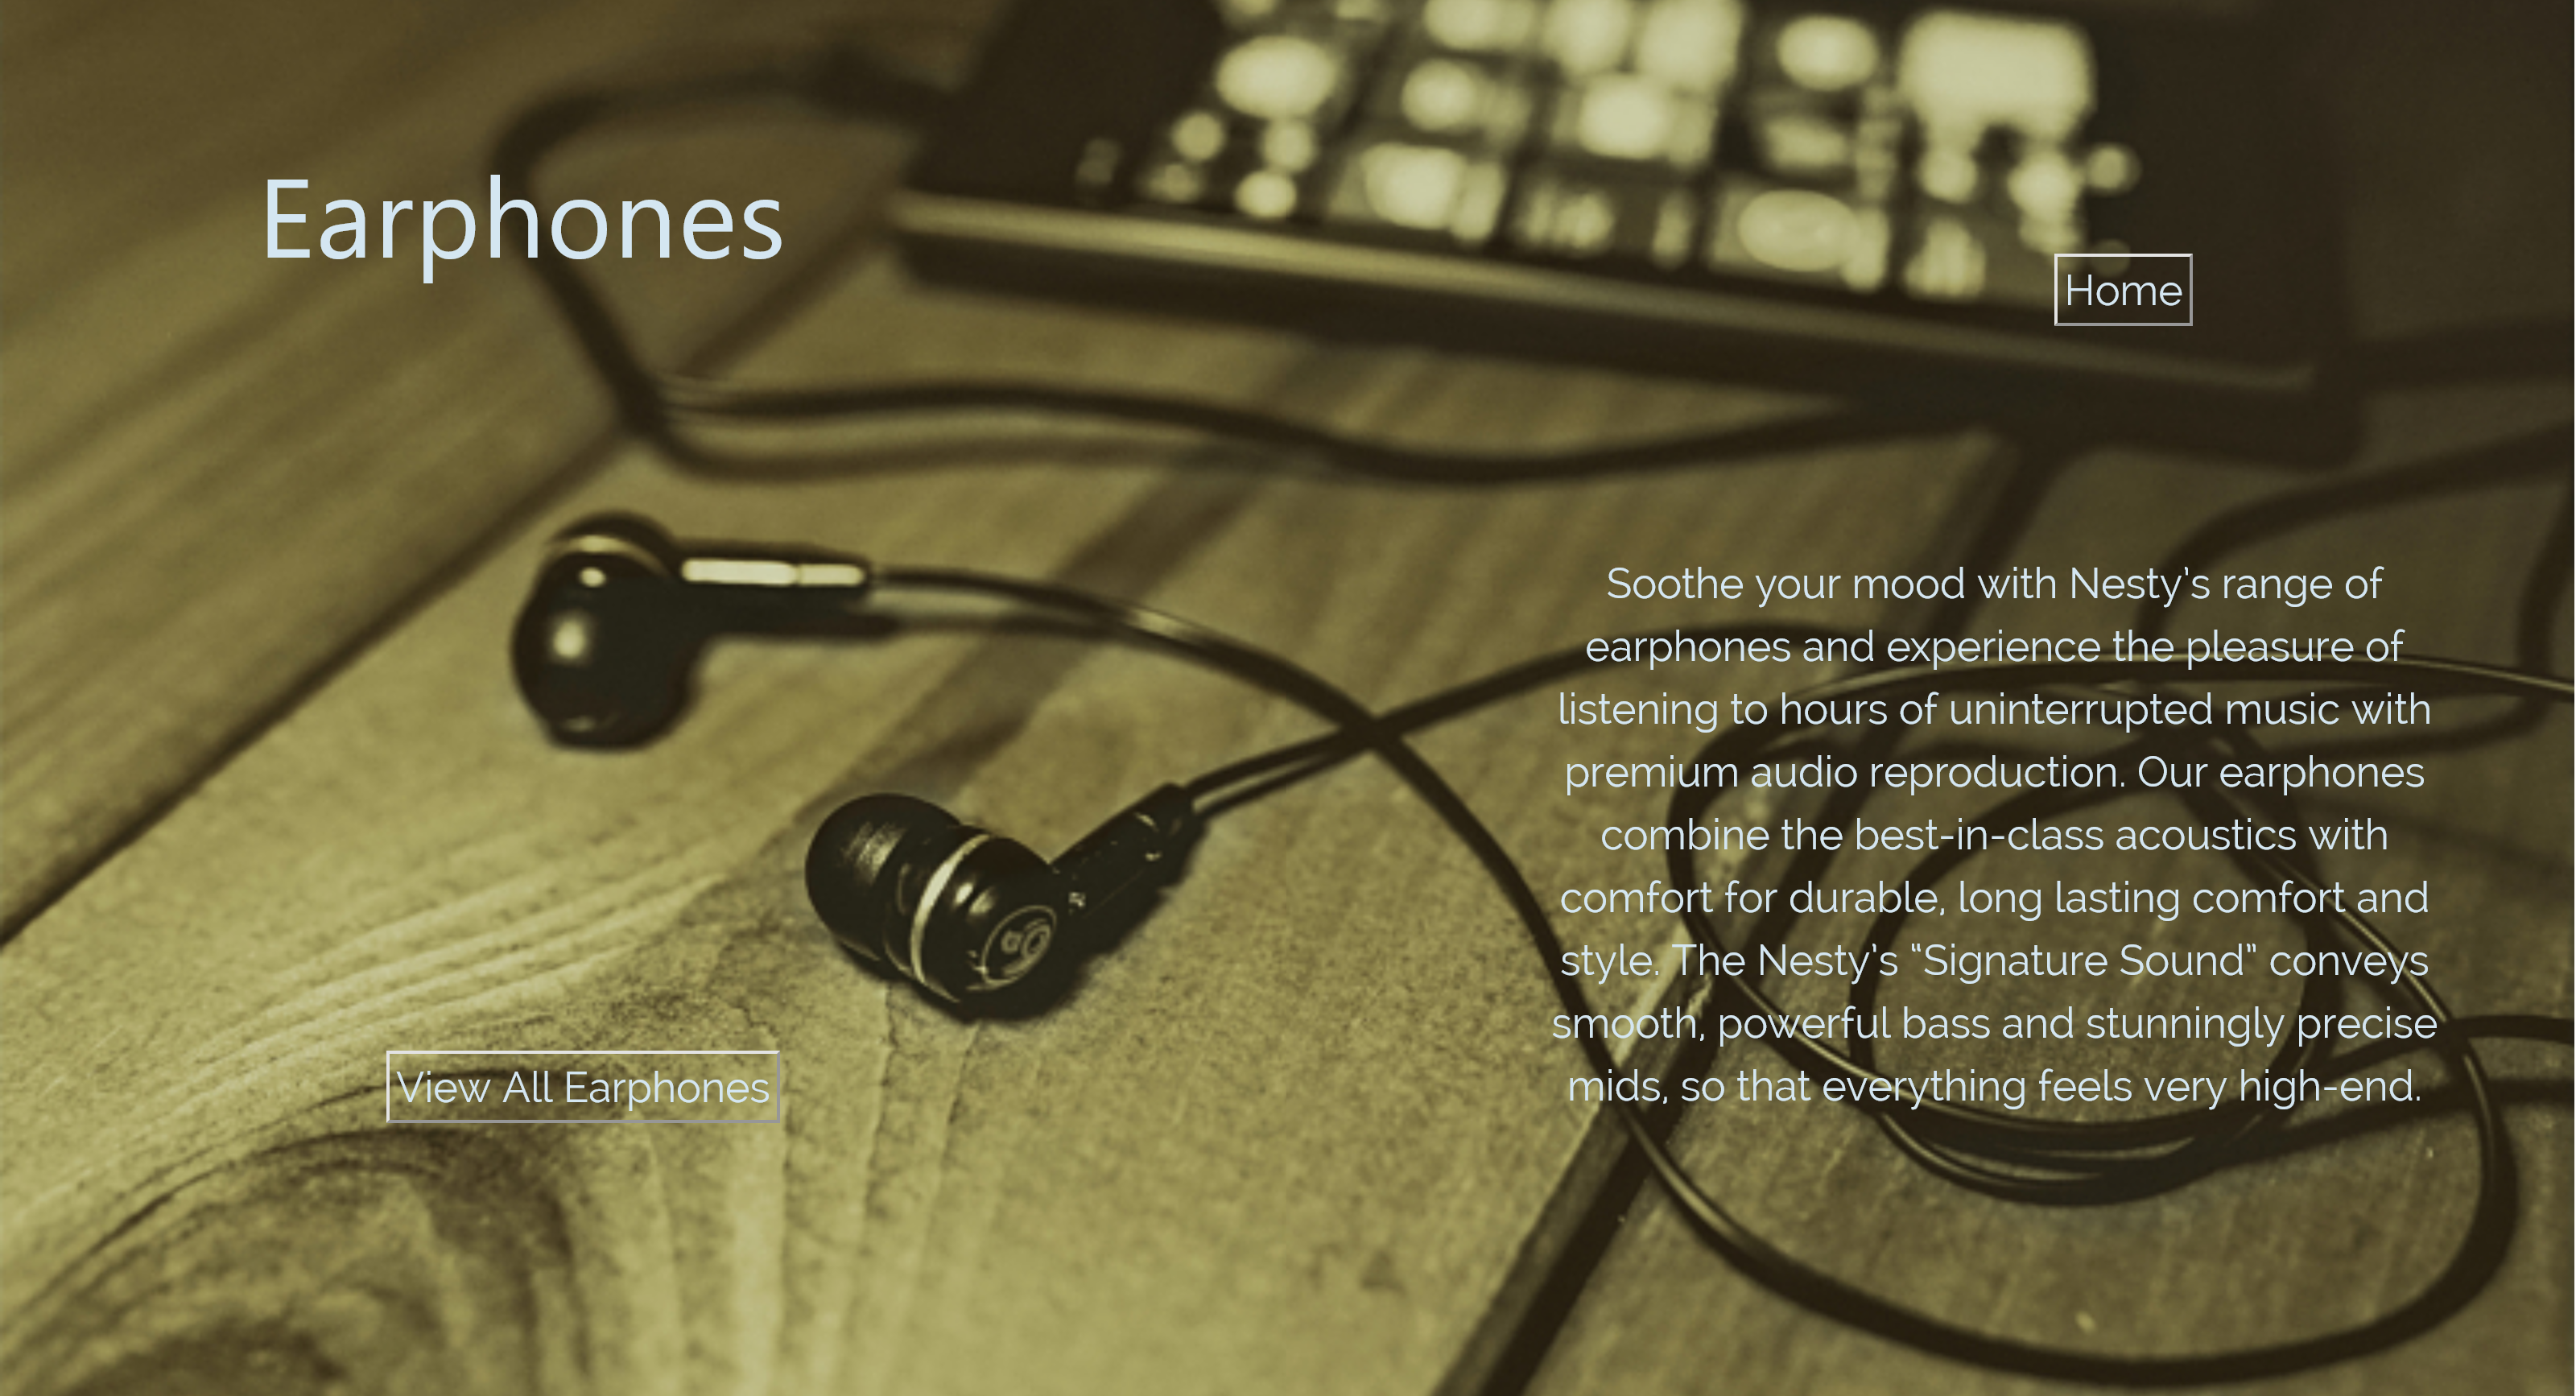 Best Sound Earphones Also Available